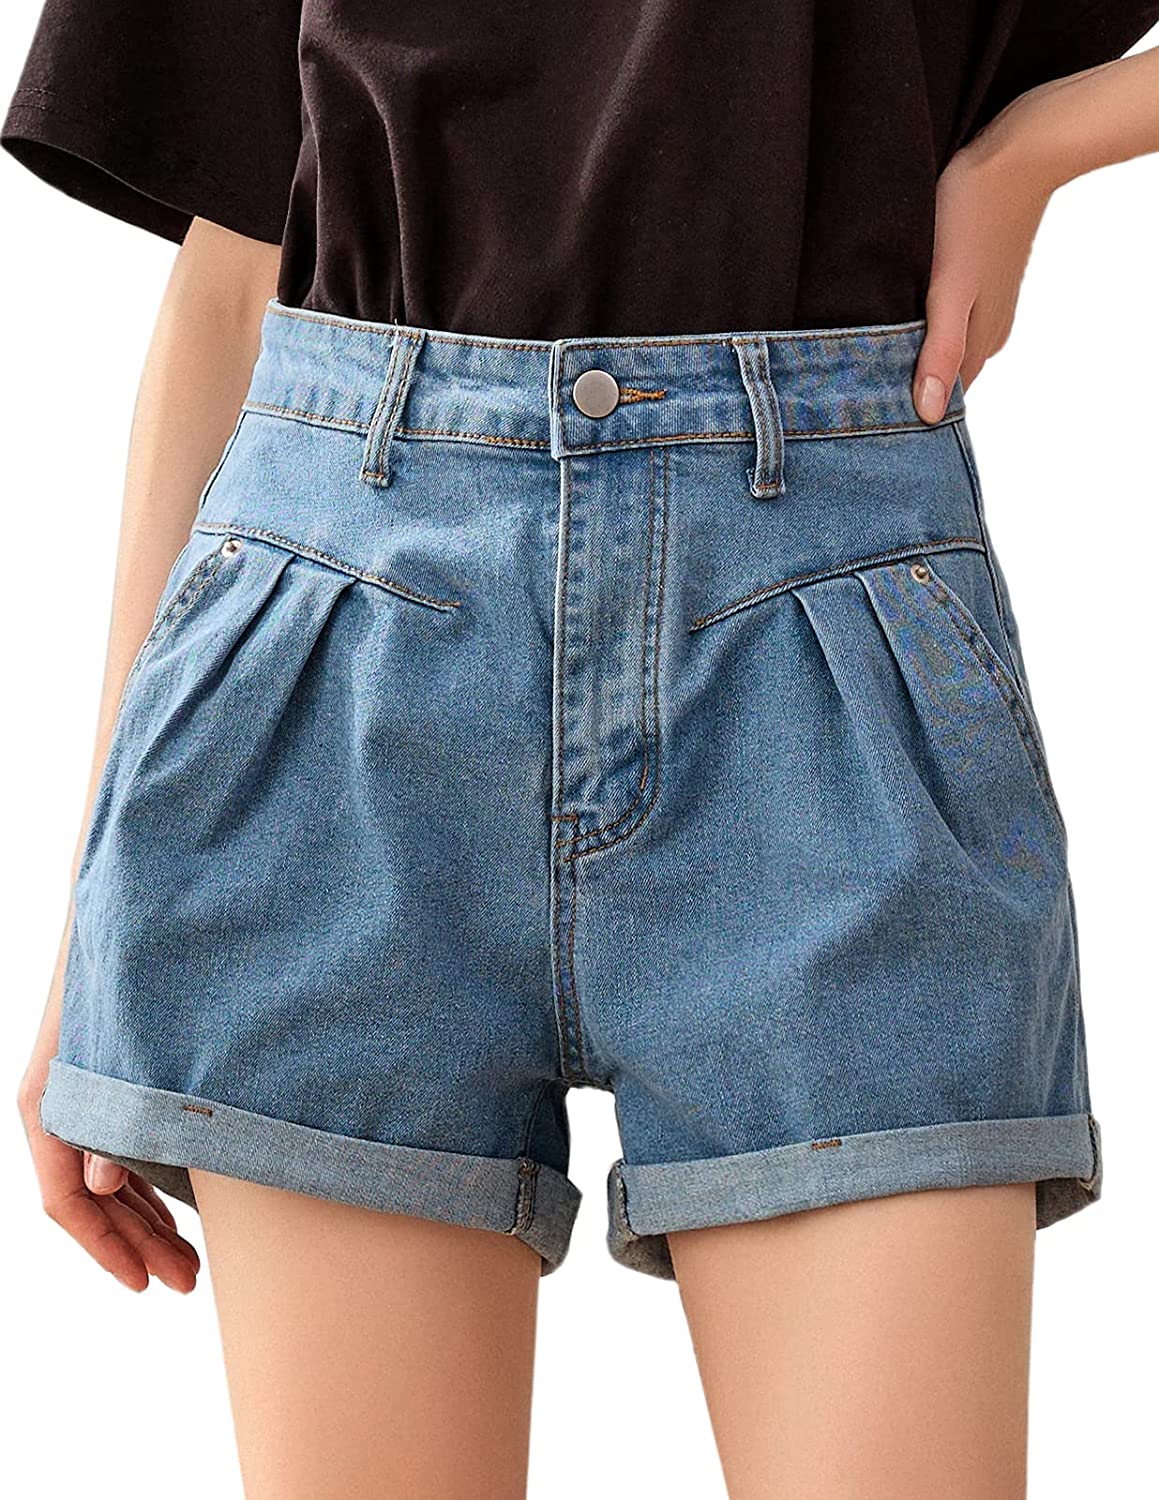 Buy JASAMBAC Women's High Waisted Denim Shorts Rolled Hem Wide Leg Casual Jean  Shorts with Pockets, #2blue, Small at